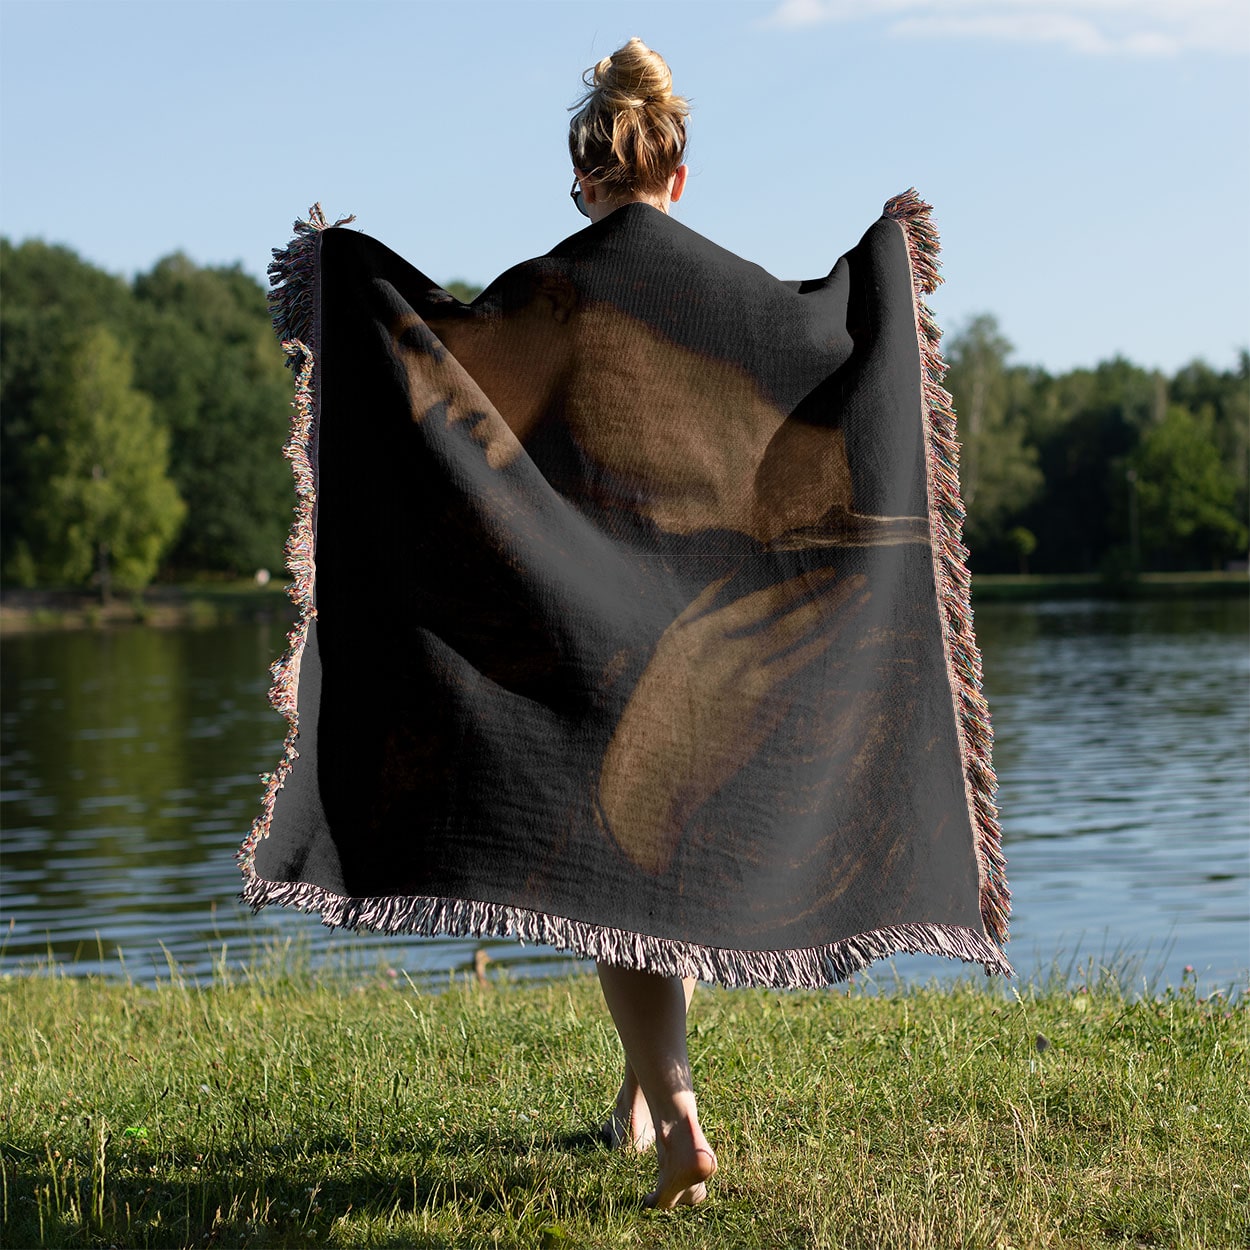 Black and White Moody Woven Blanket Held on a Woman's Back Outside